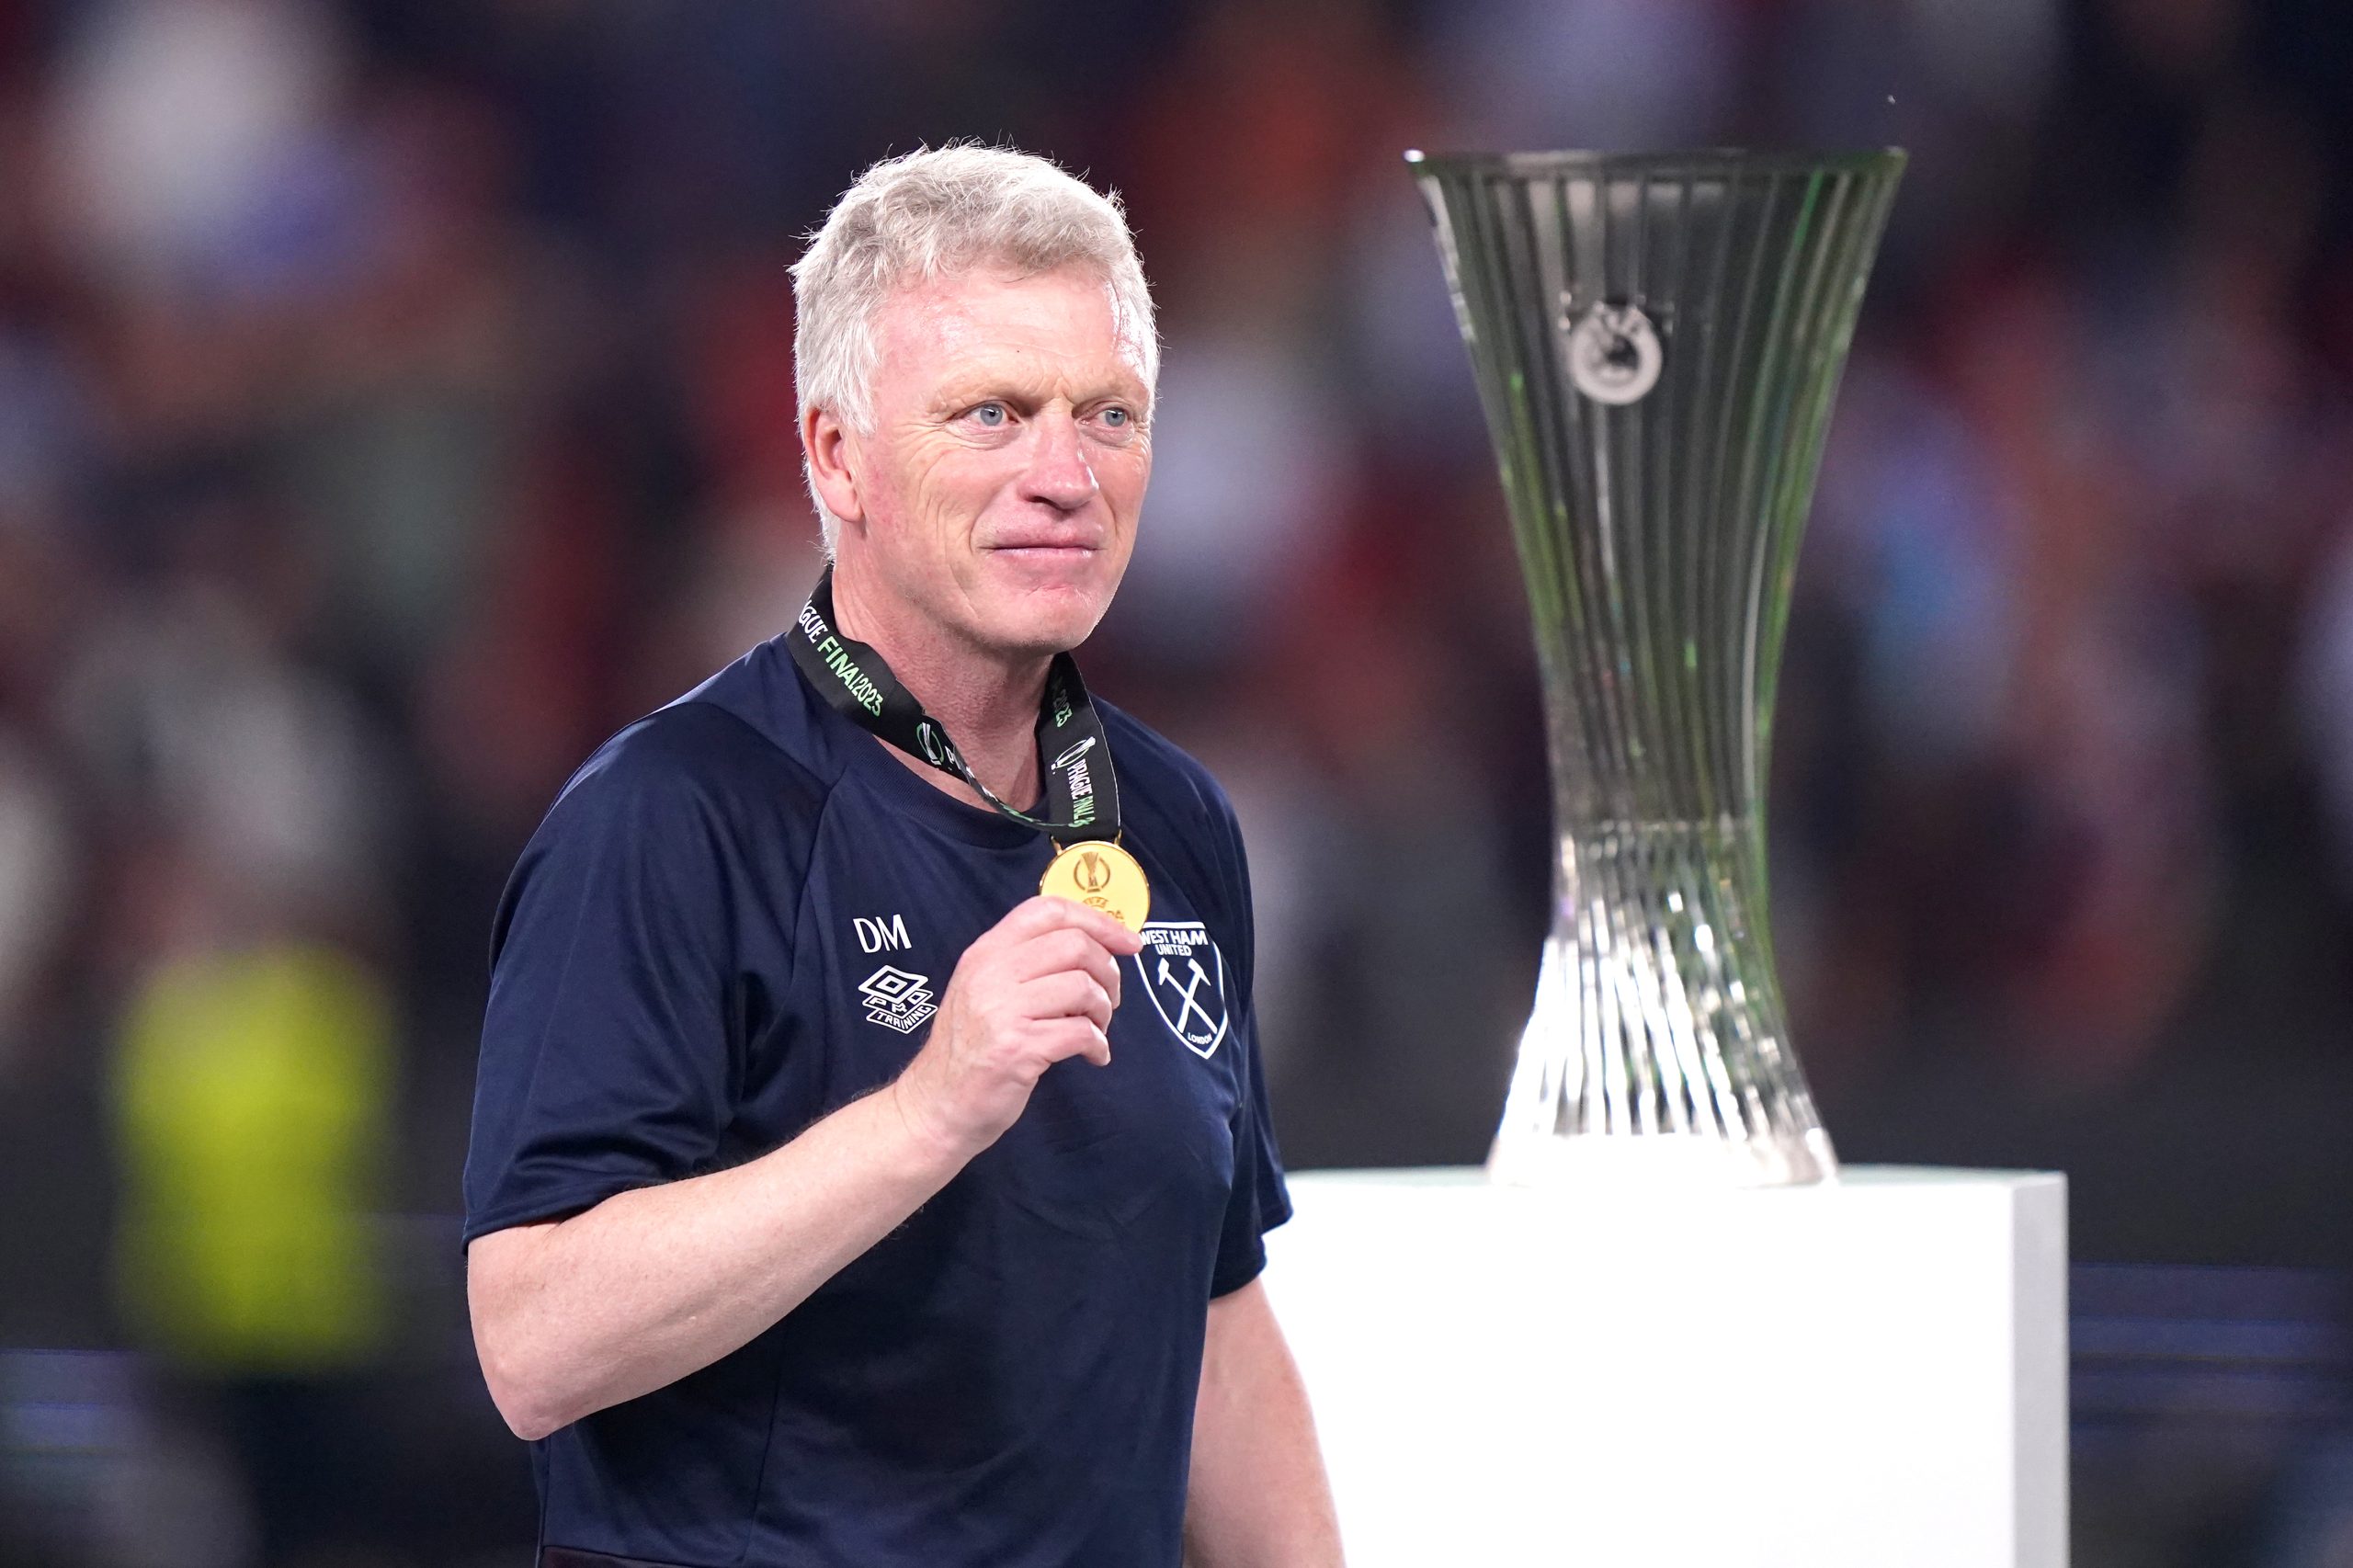 David Moyes hands over medal to his father after West Ham end wait for trophy